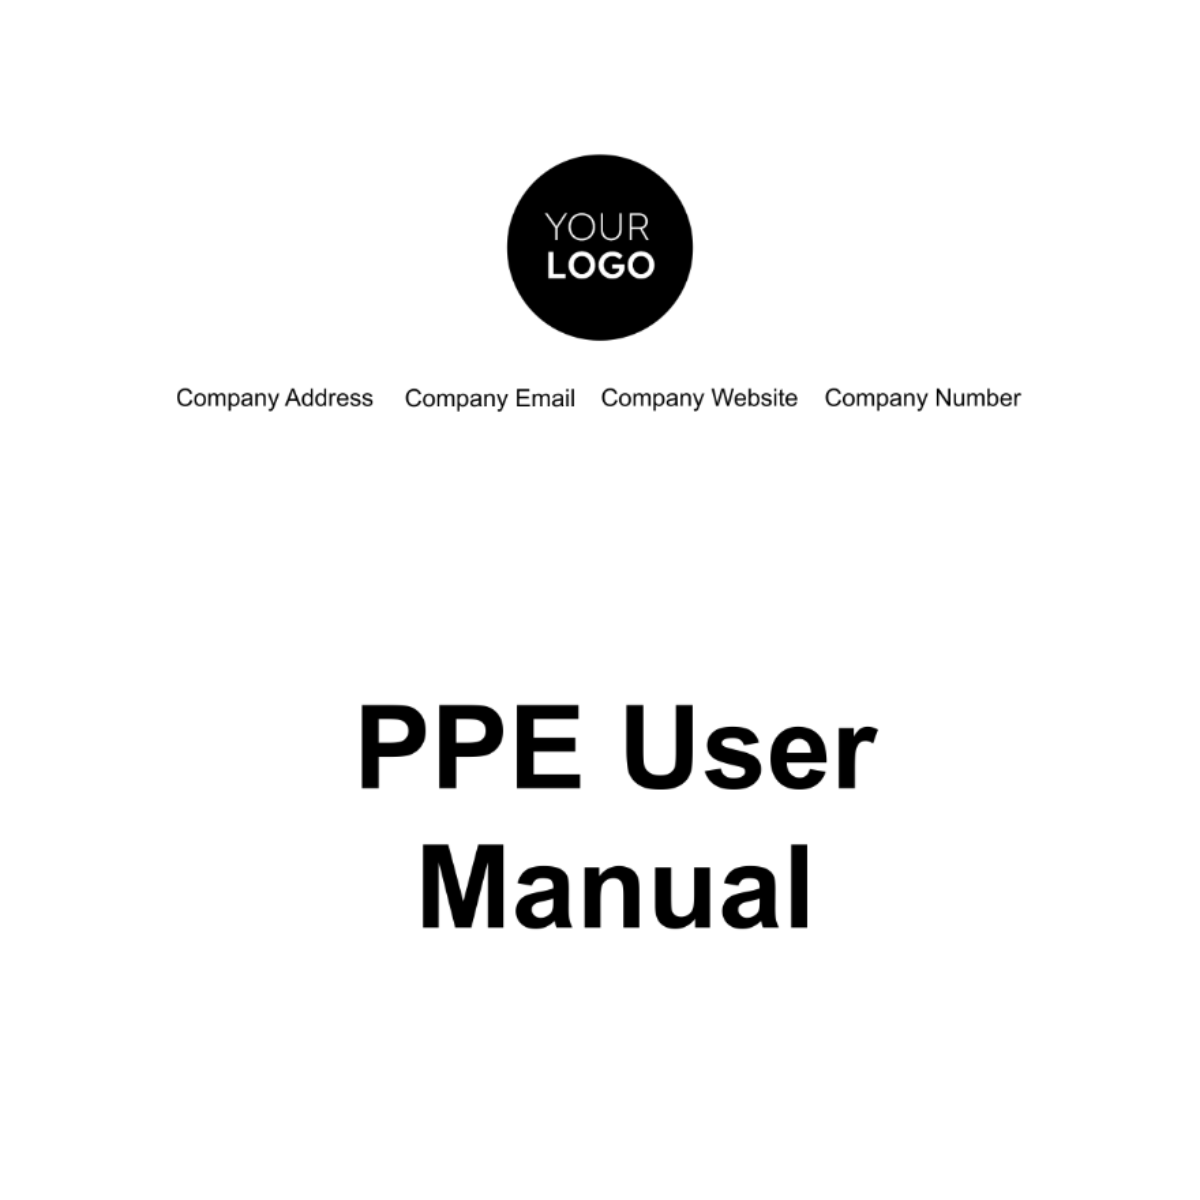 Free PPE User Manual Template